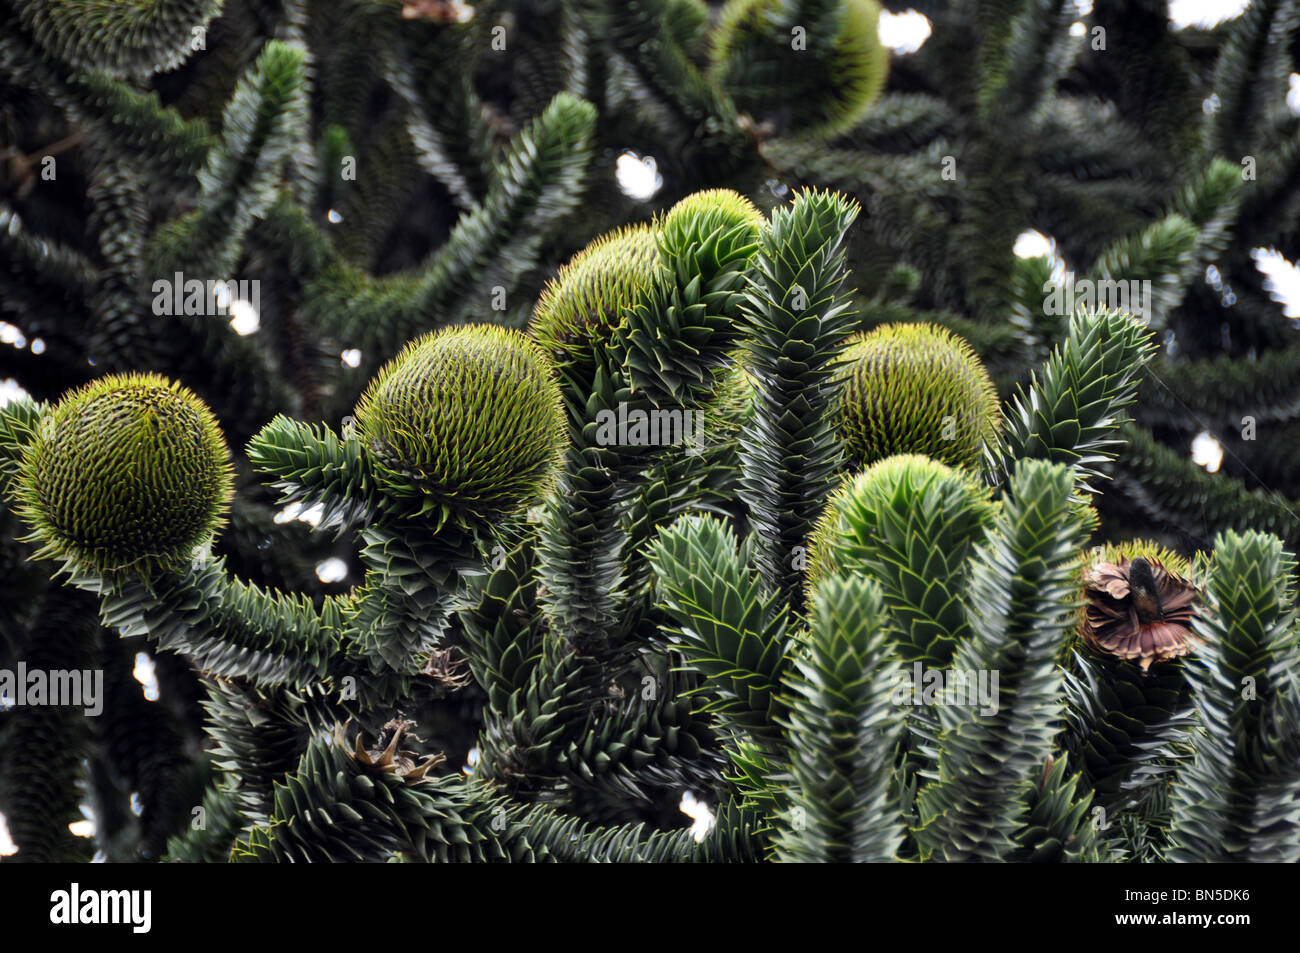 Closeup of Monkey Puzzle (pine) Tree with large and strange blossoms Stock Photo